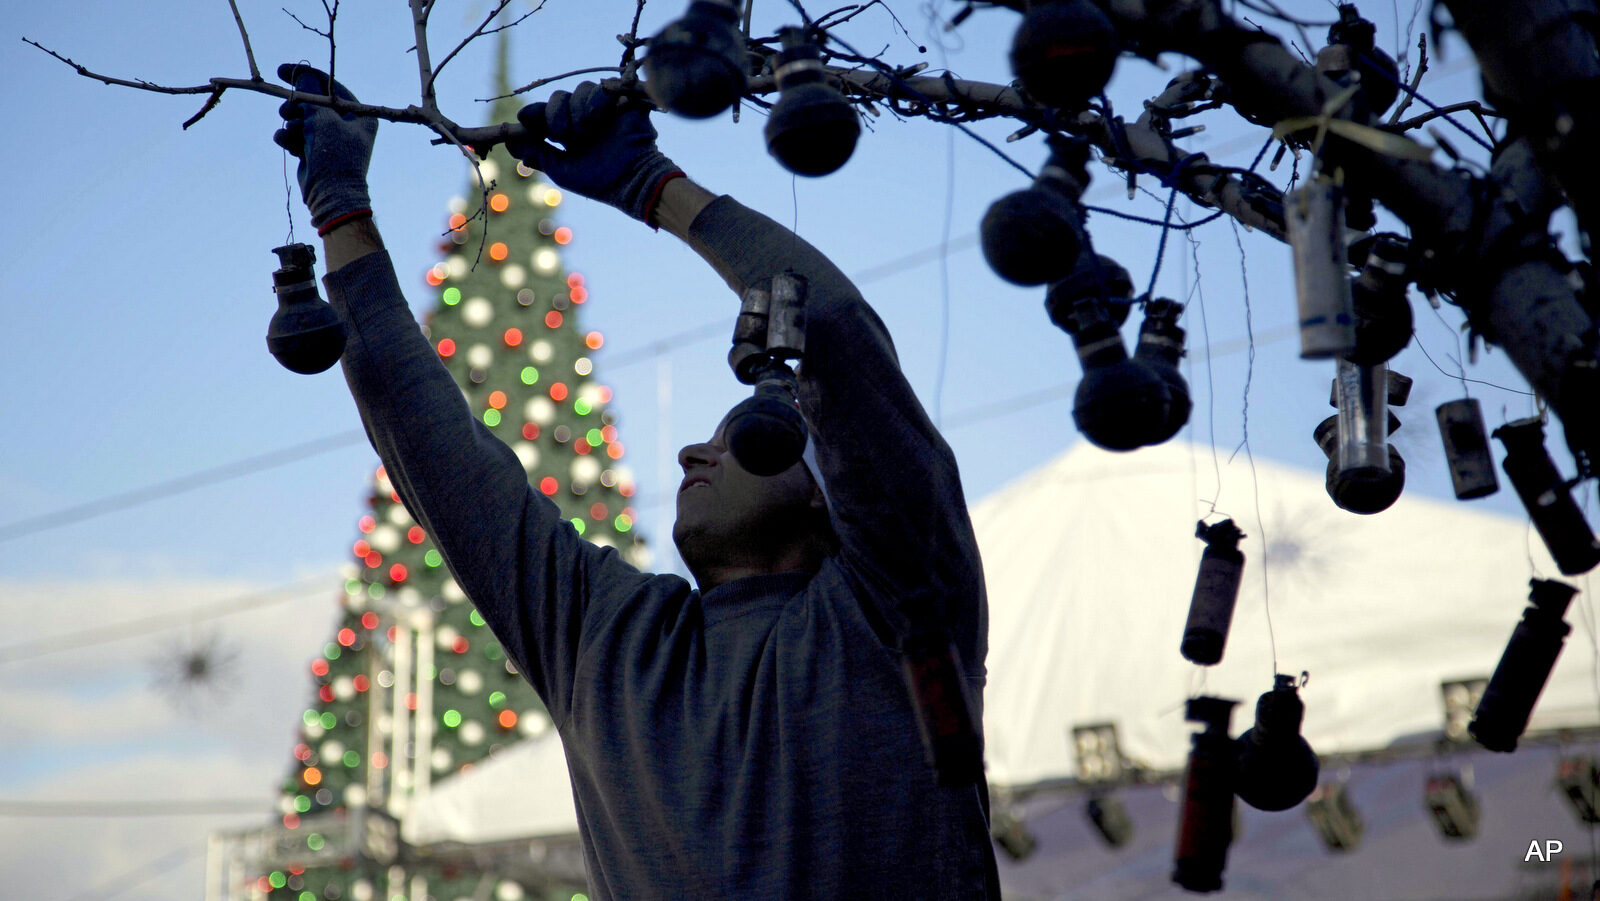 A Palestinian decorates a Christmas tree with tear gas canisters at Manger Square